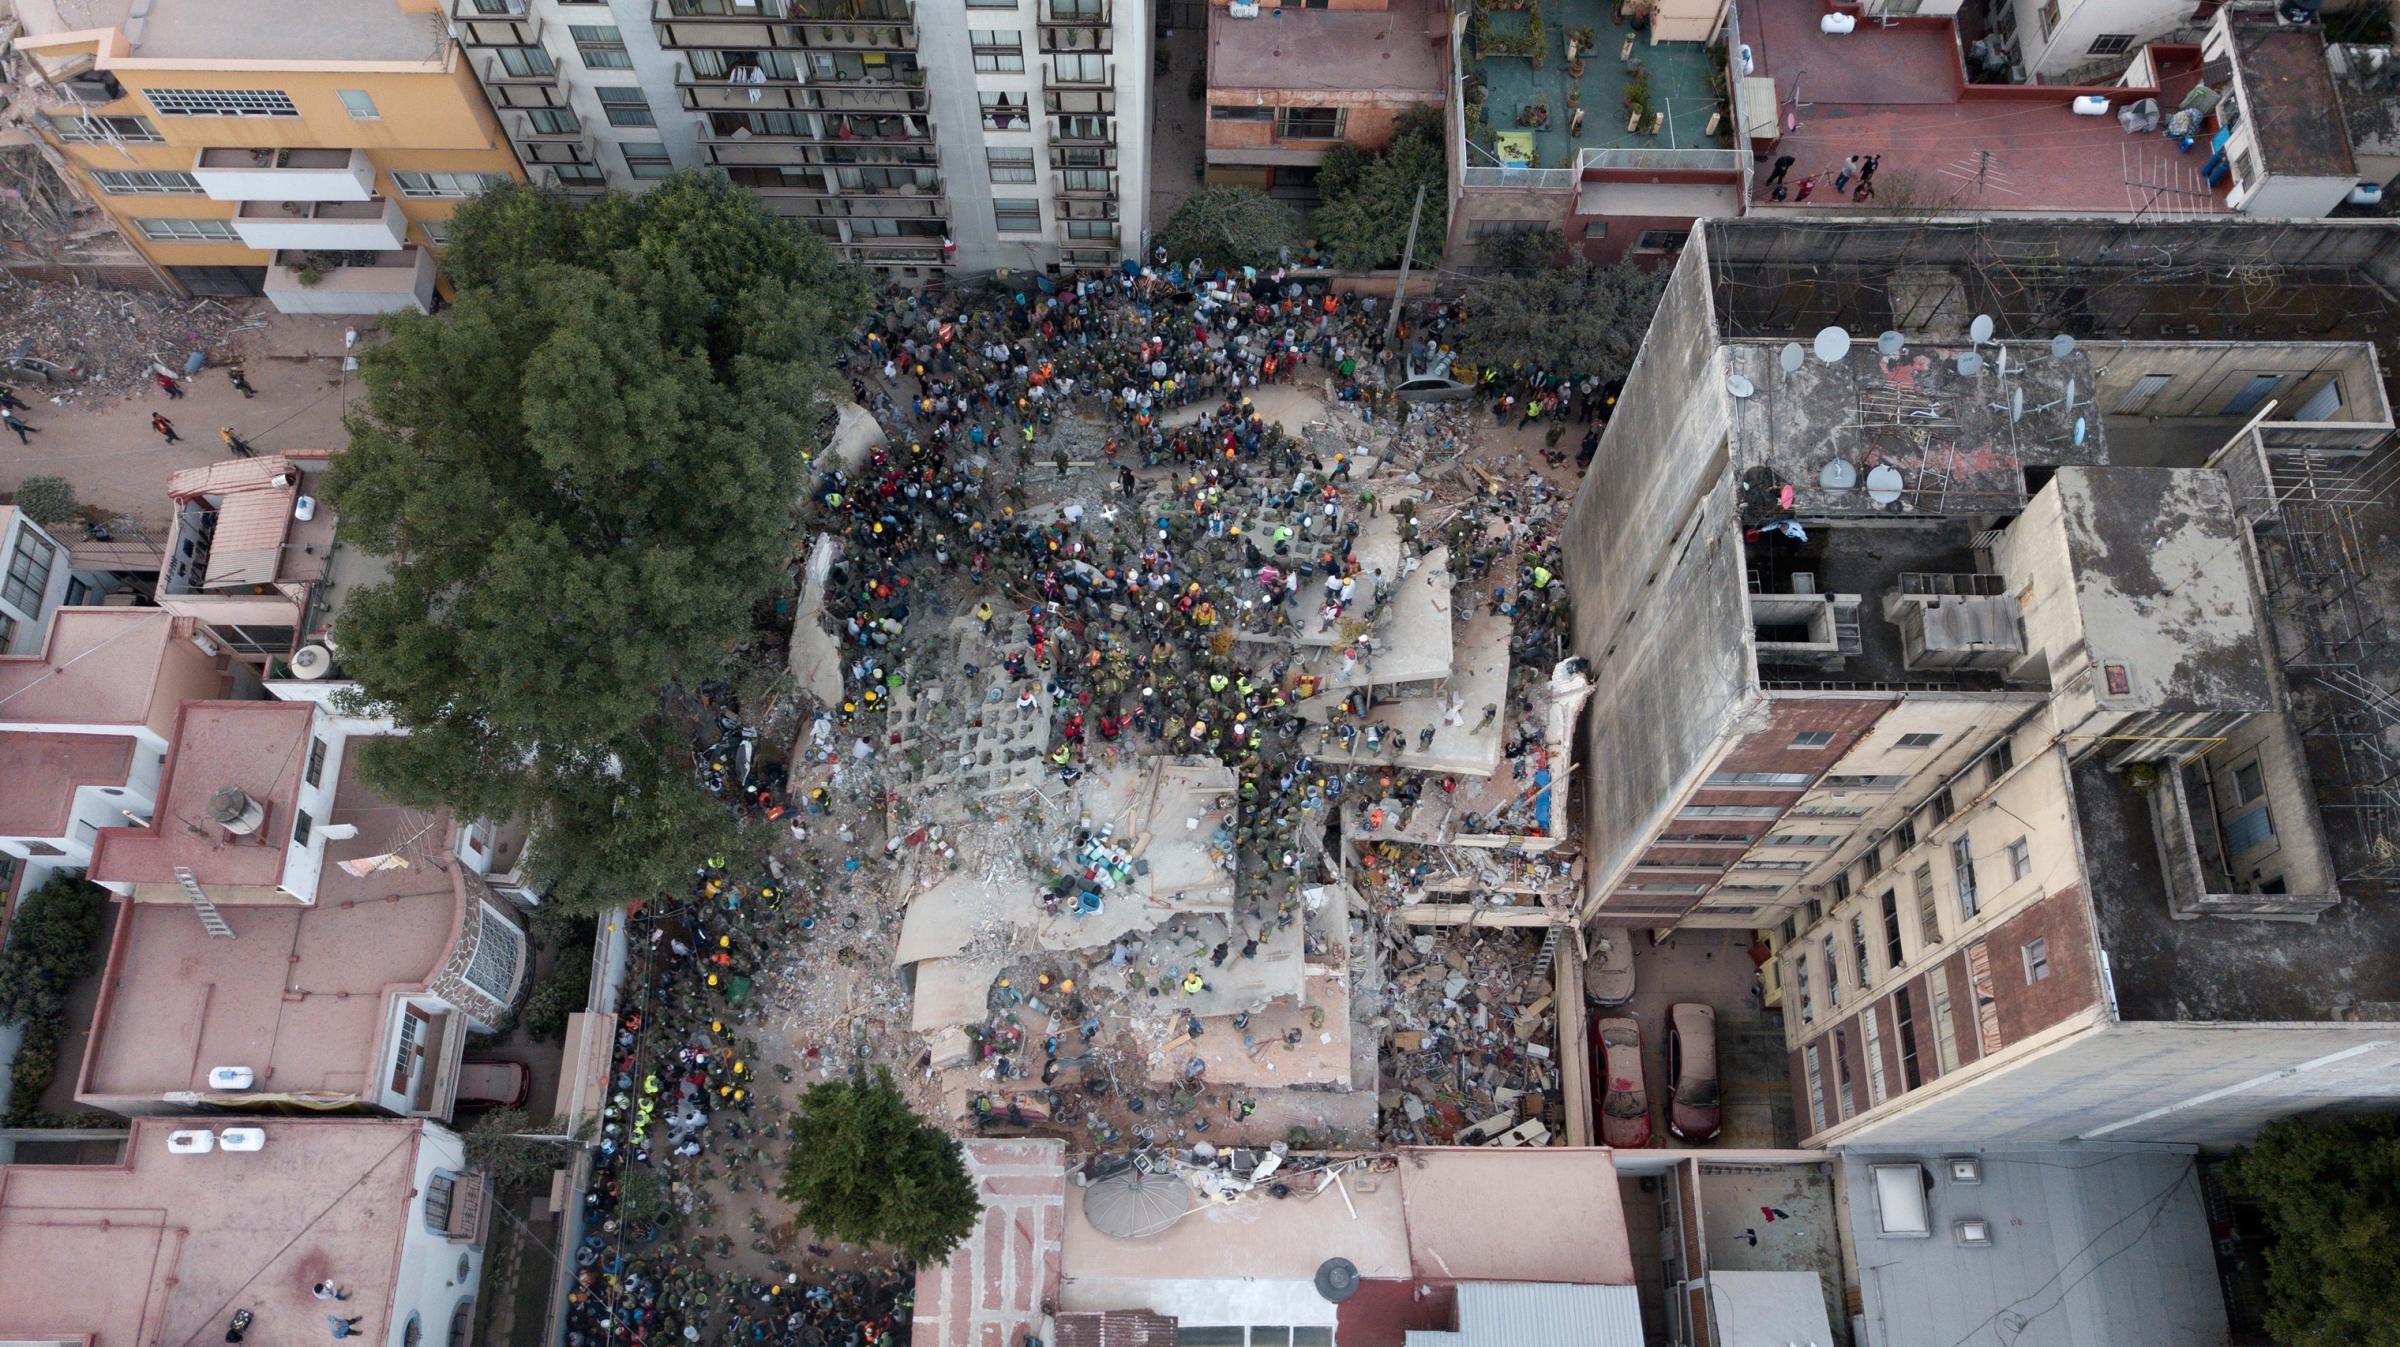 Rescue workers and volunteers search for survivors on a collapsed building the Del Valle neighborhood in Mexico City on Sept. 19, 2017.